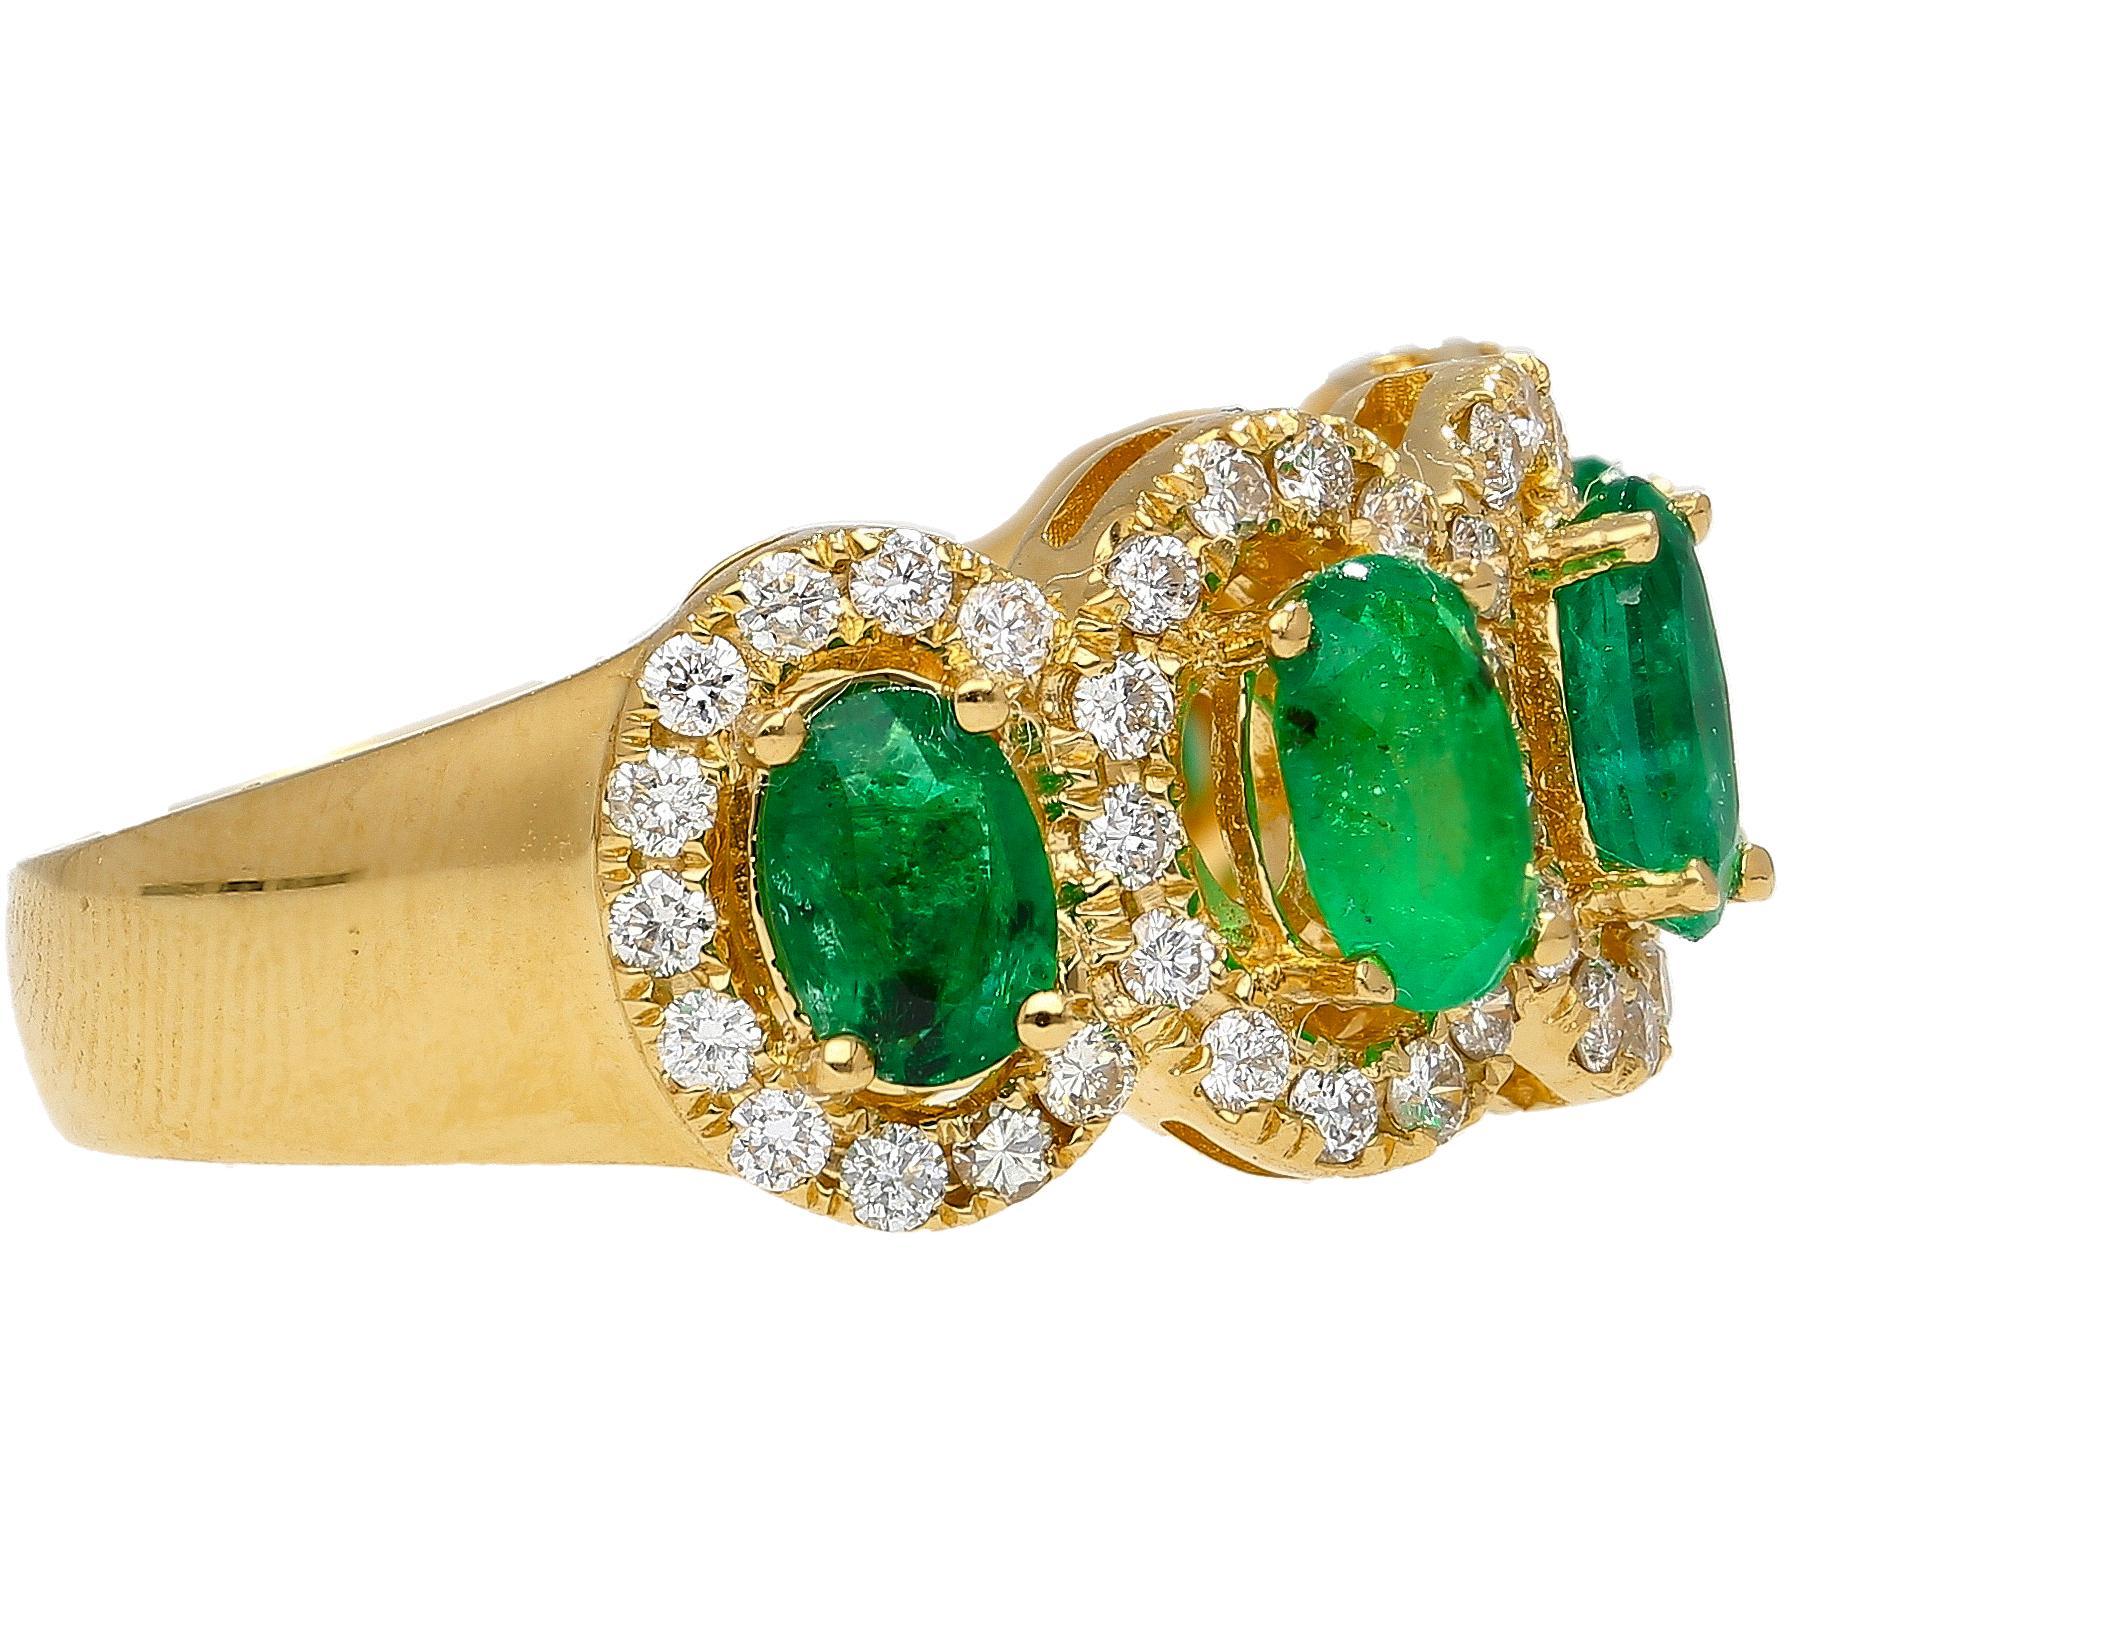 2.11 Carat Oval Cut Emerald and Diamond Wedding Band in 18K Gold In New Condition For Sale In Miami, FL